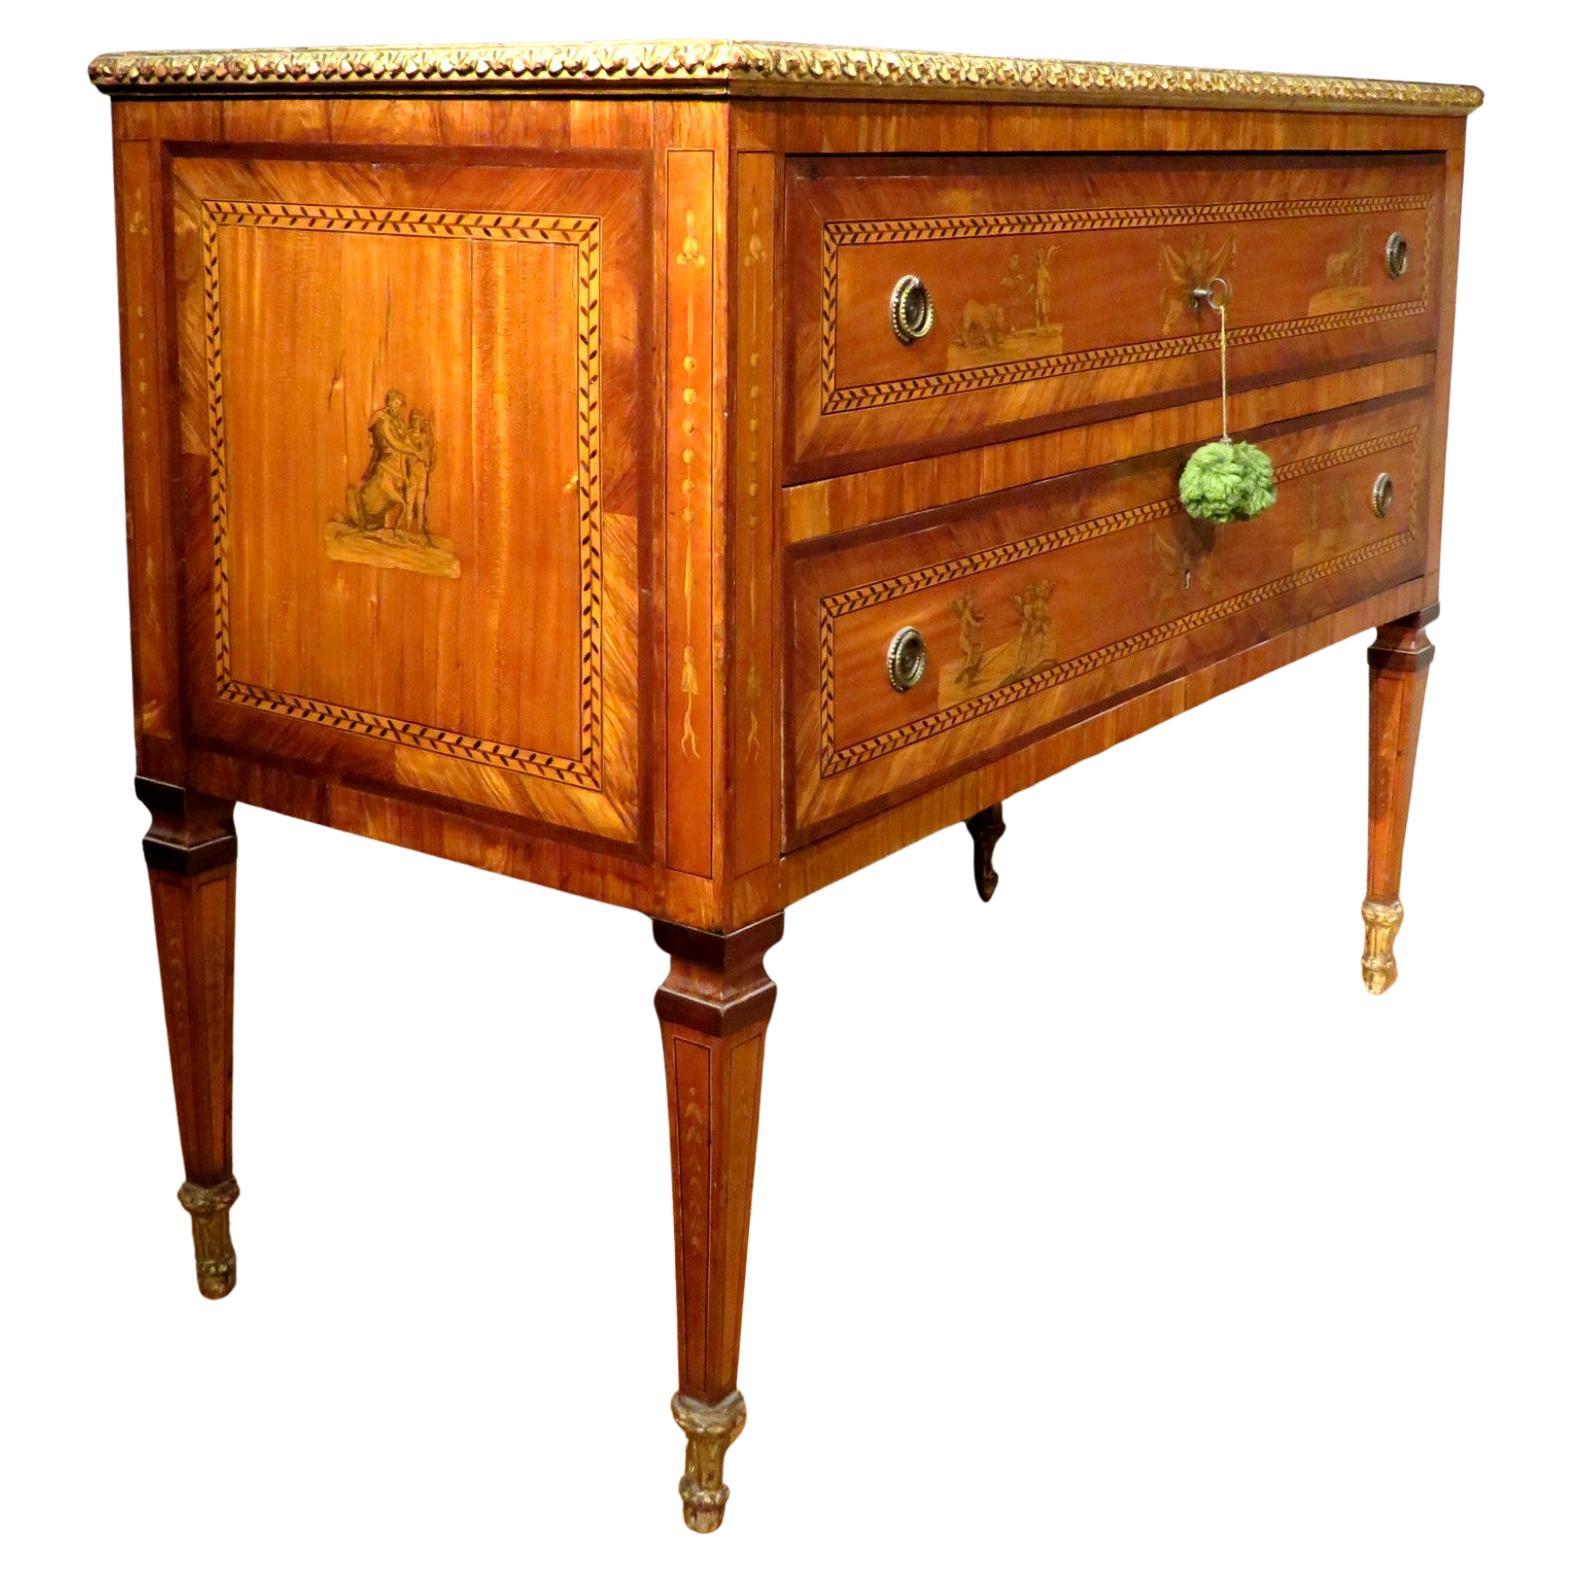 Exceptional 18th Century Italian Neoclassical Parquetry and Marquetry Commode 